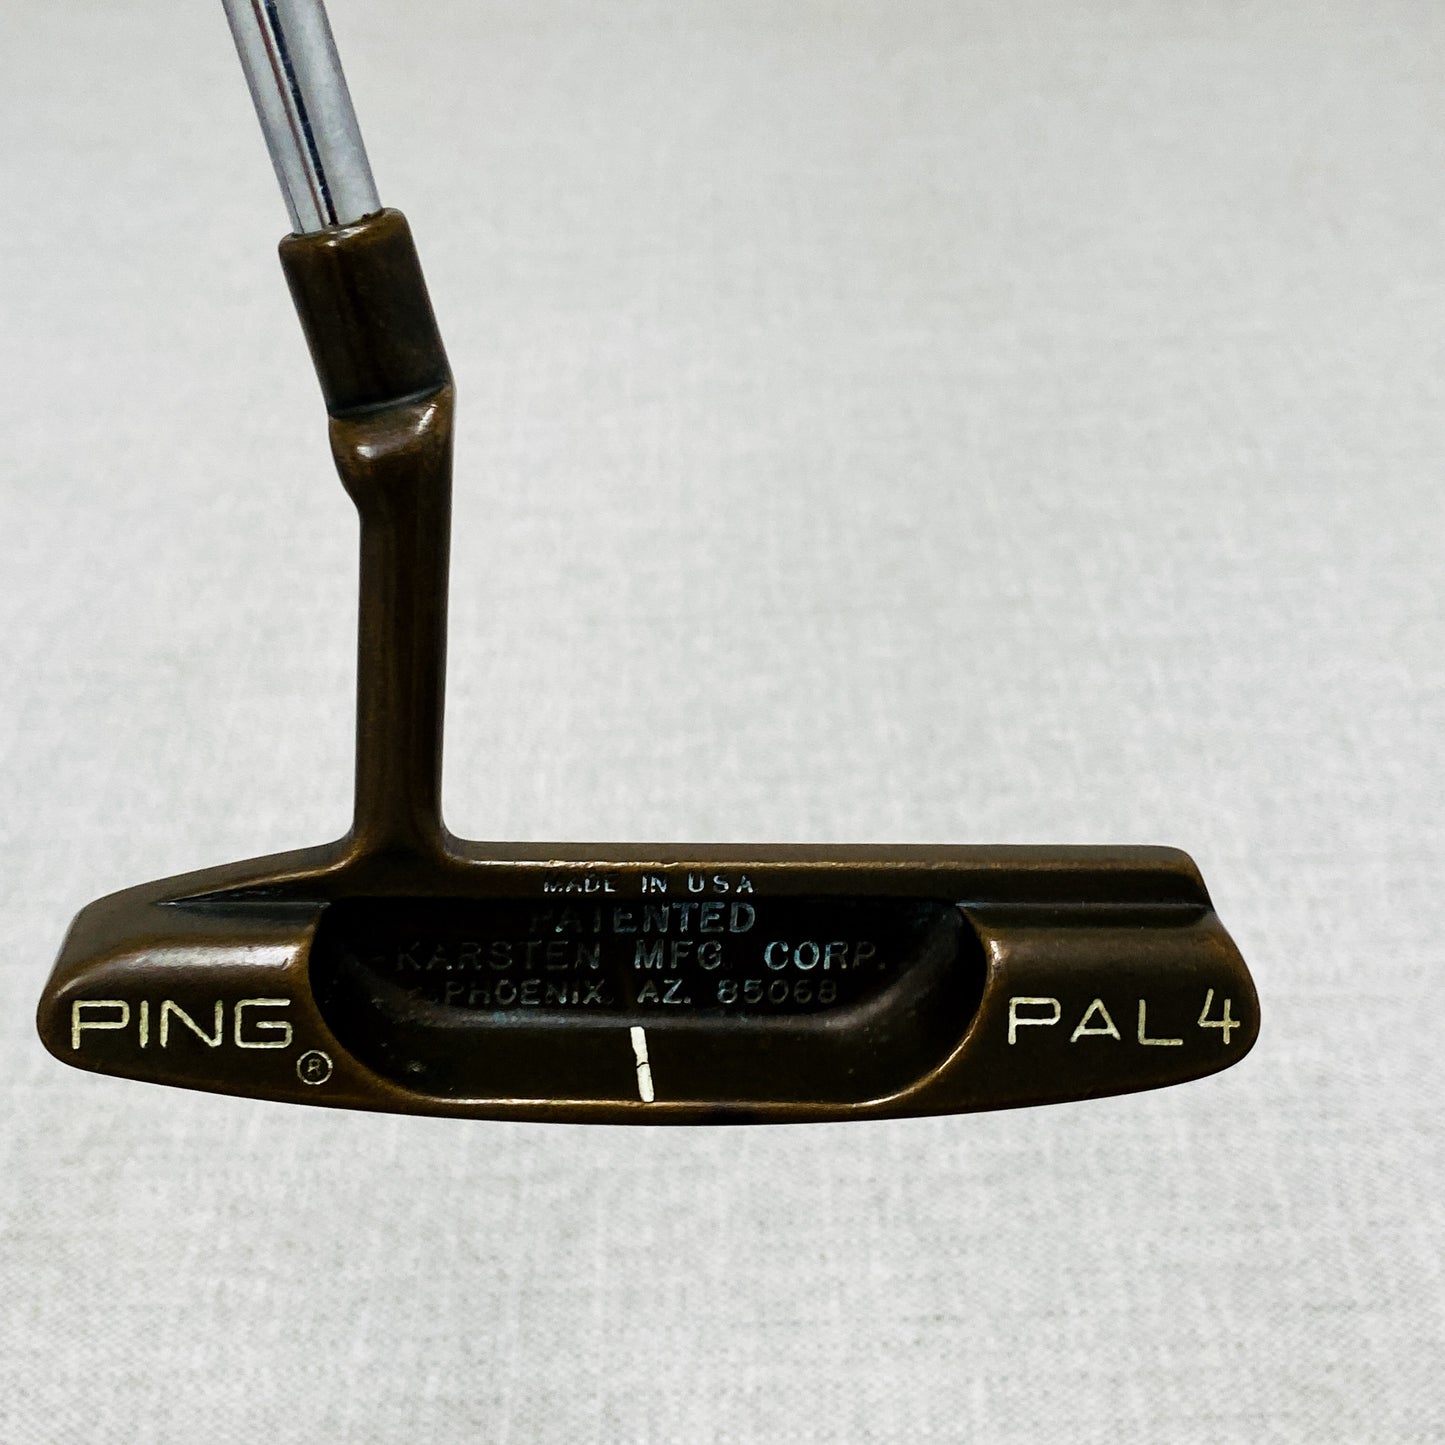 PING Pal 4 Beryllium Copper Putter. 36 inch - Very Good Condition # T1015